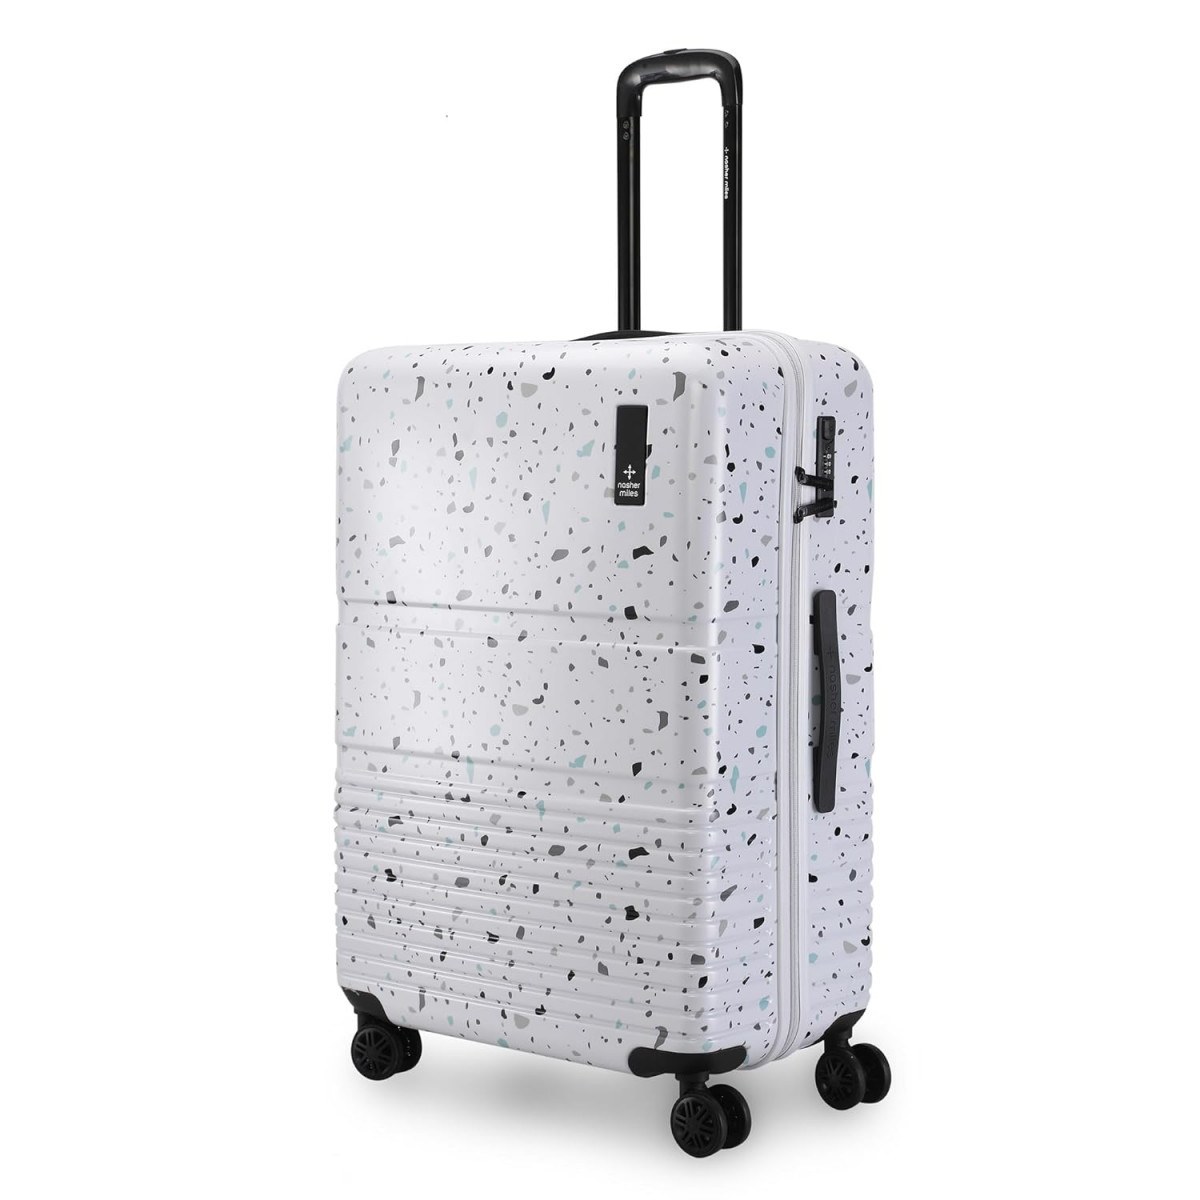 Nasher Miles Venice Hard-Sided Polycarbonate Check-in Luggage Terrazzo Printed Black 28 inch 75cm Trolley Bag